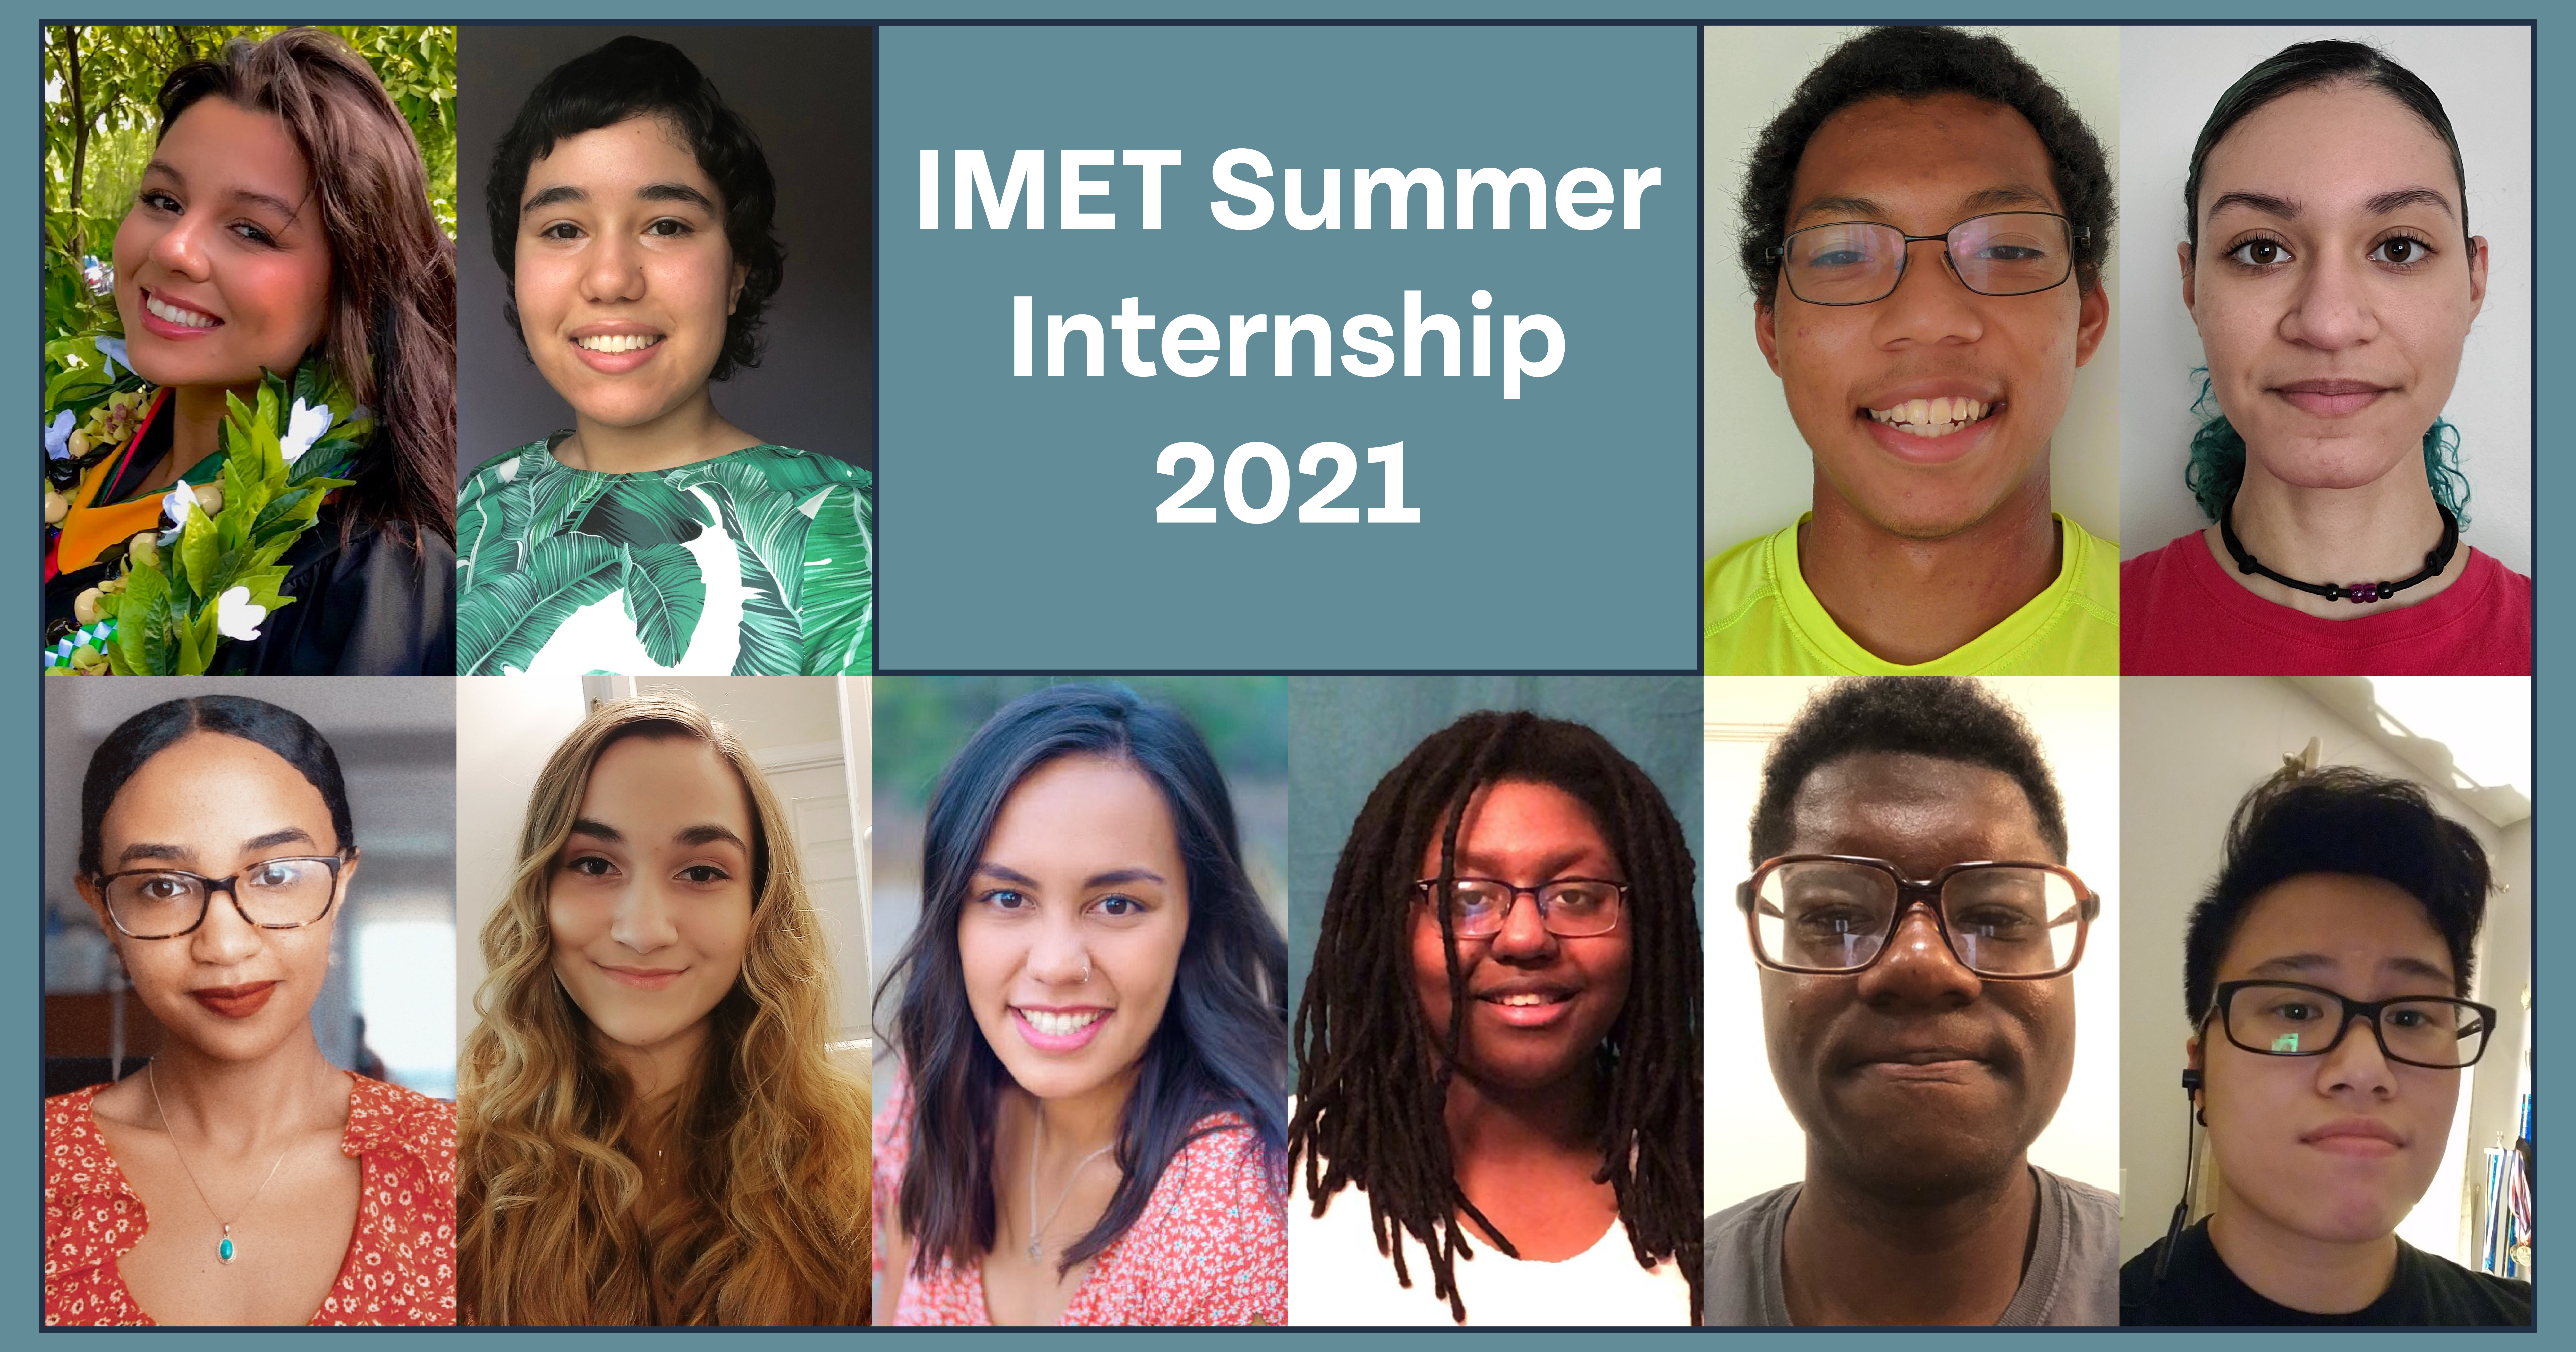 graphic with headshots of all interns and text, "IMET Summer Internship 2021"